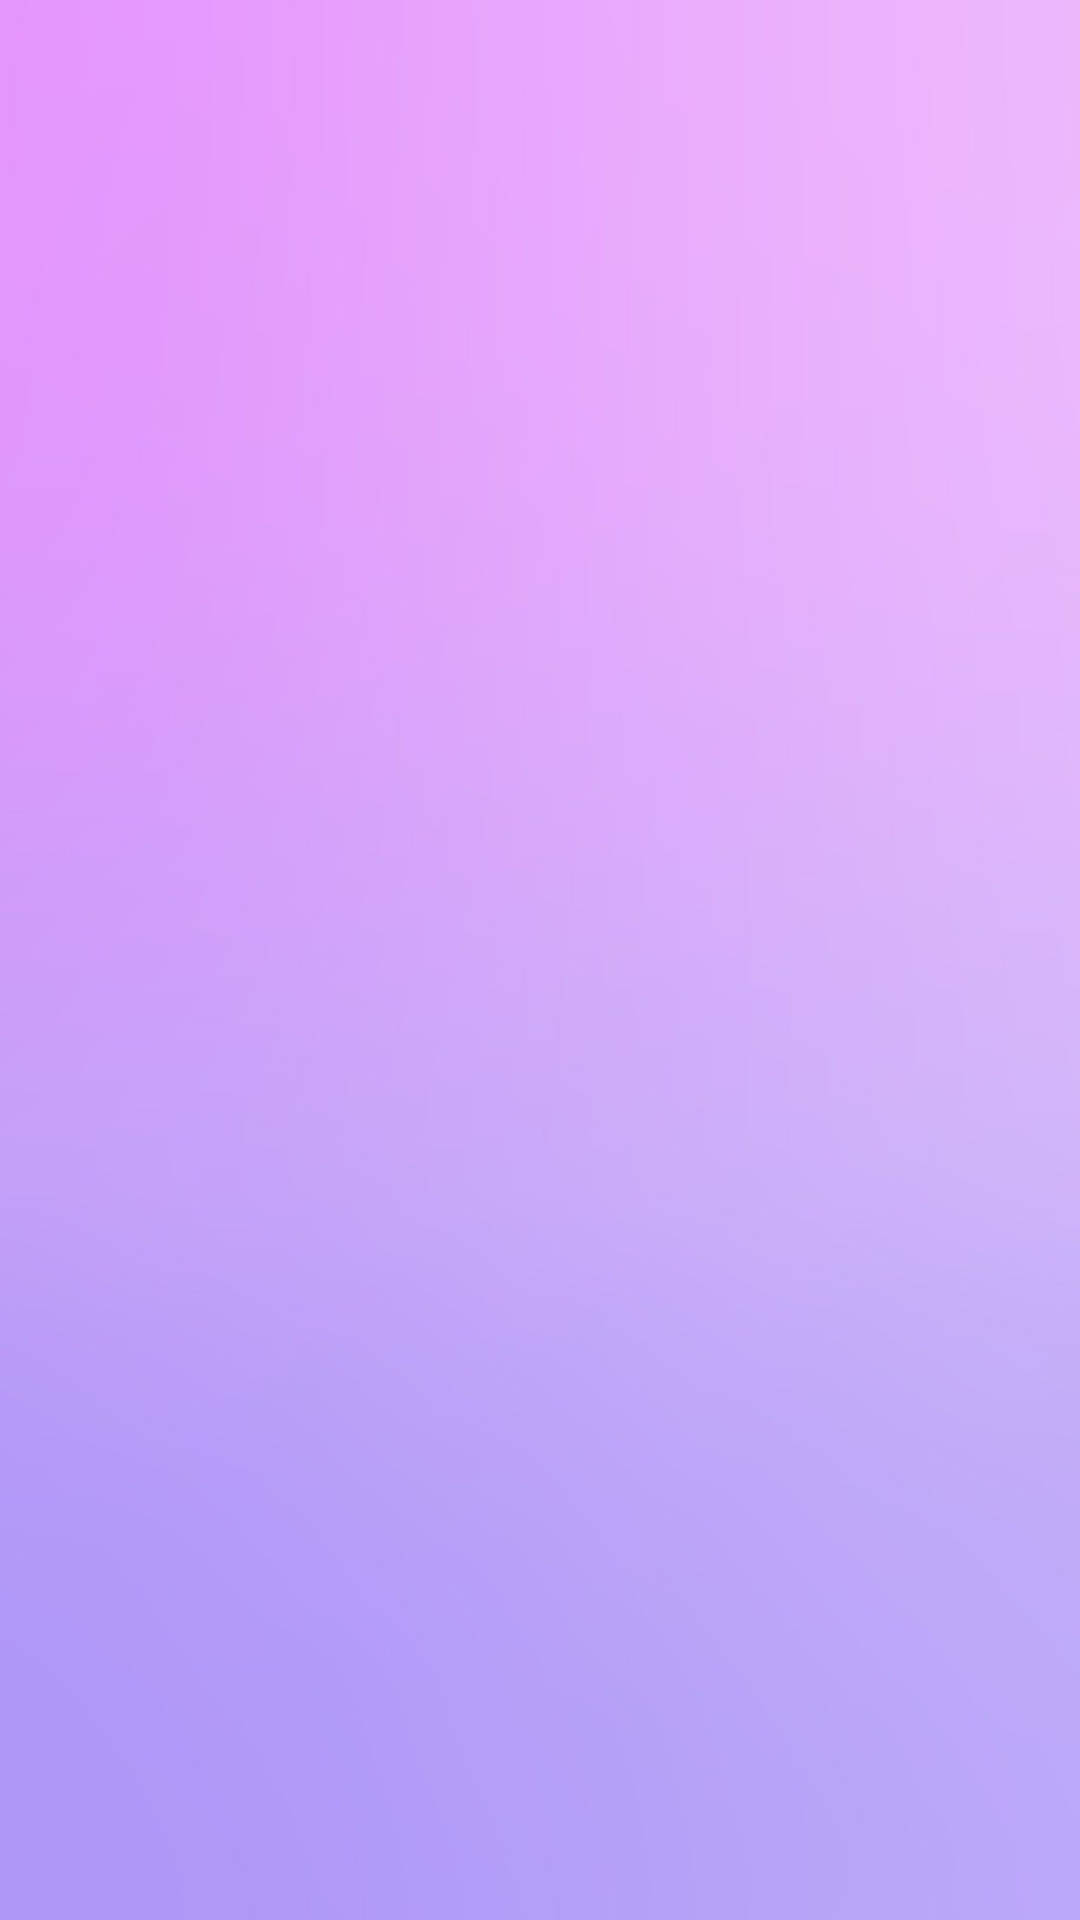 Download Gradient Of Lavender To Light Purple Iphone Wallpaper | Wallpapers .com